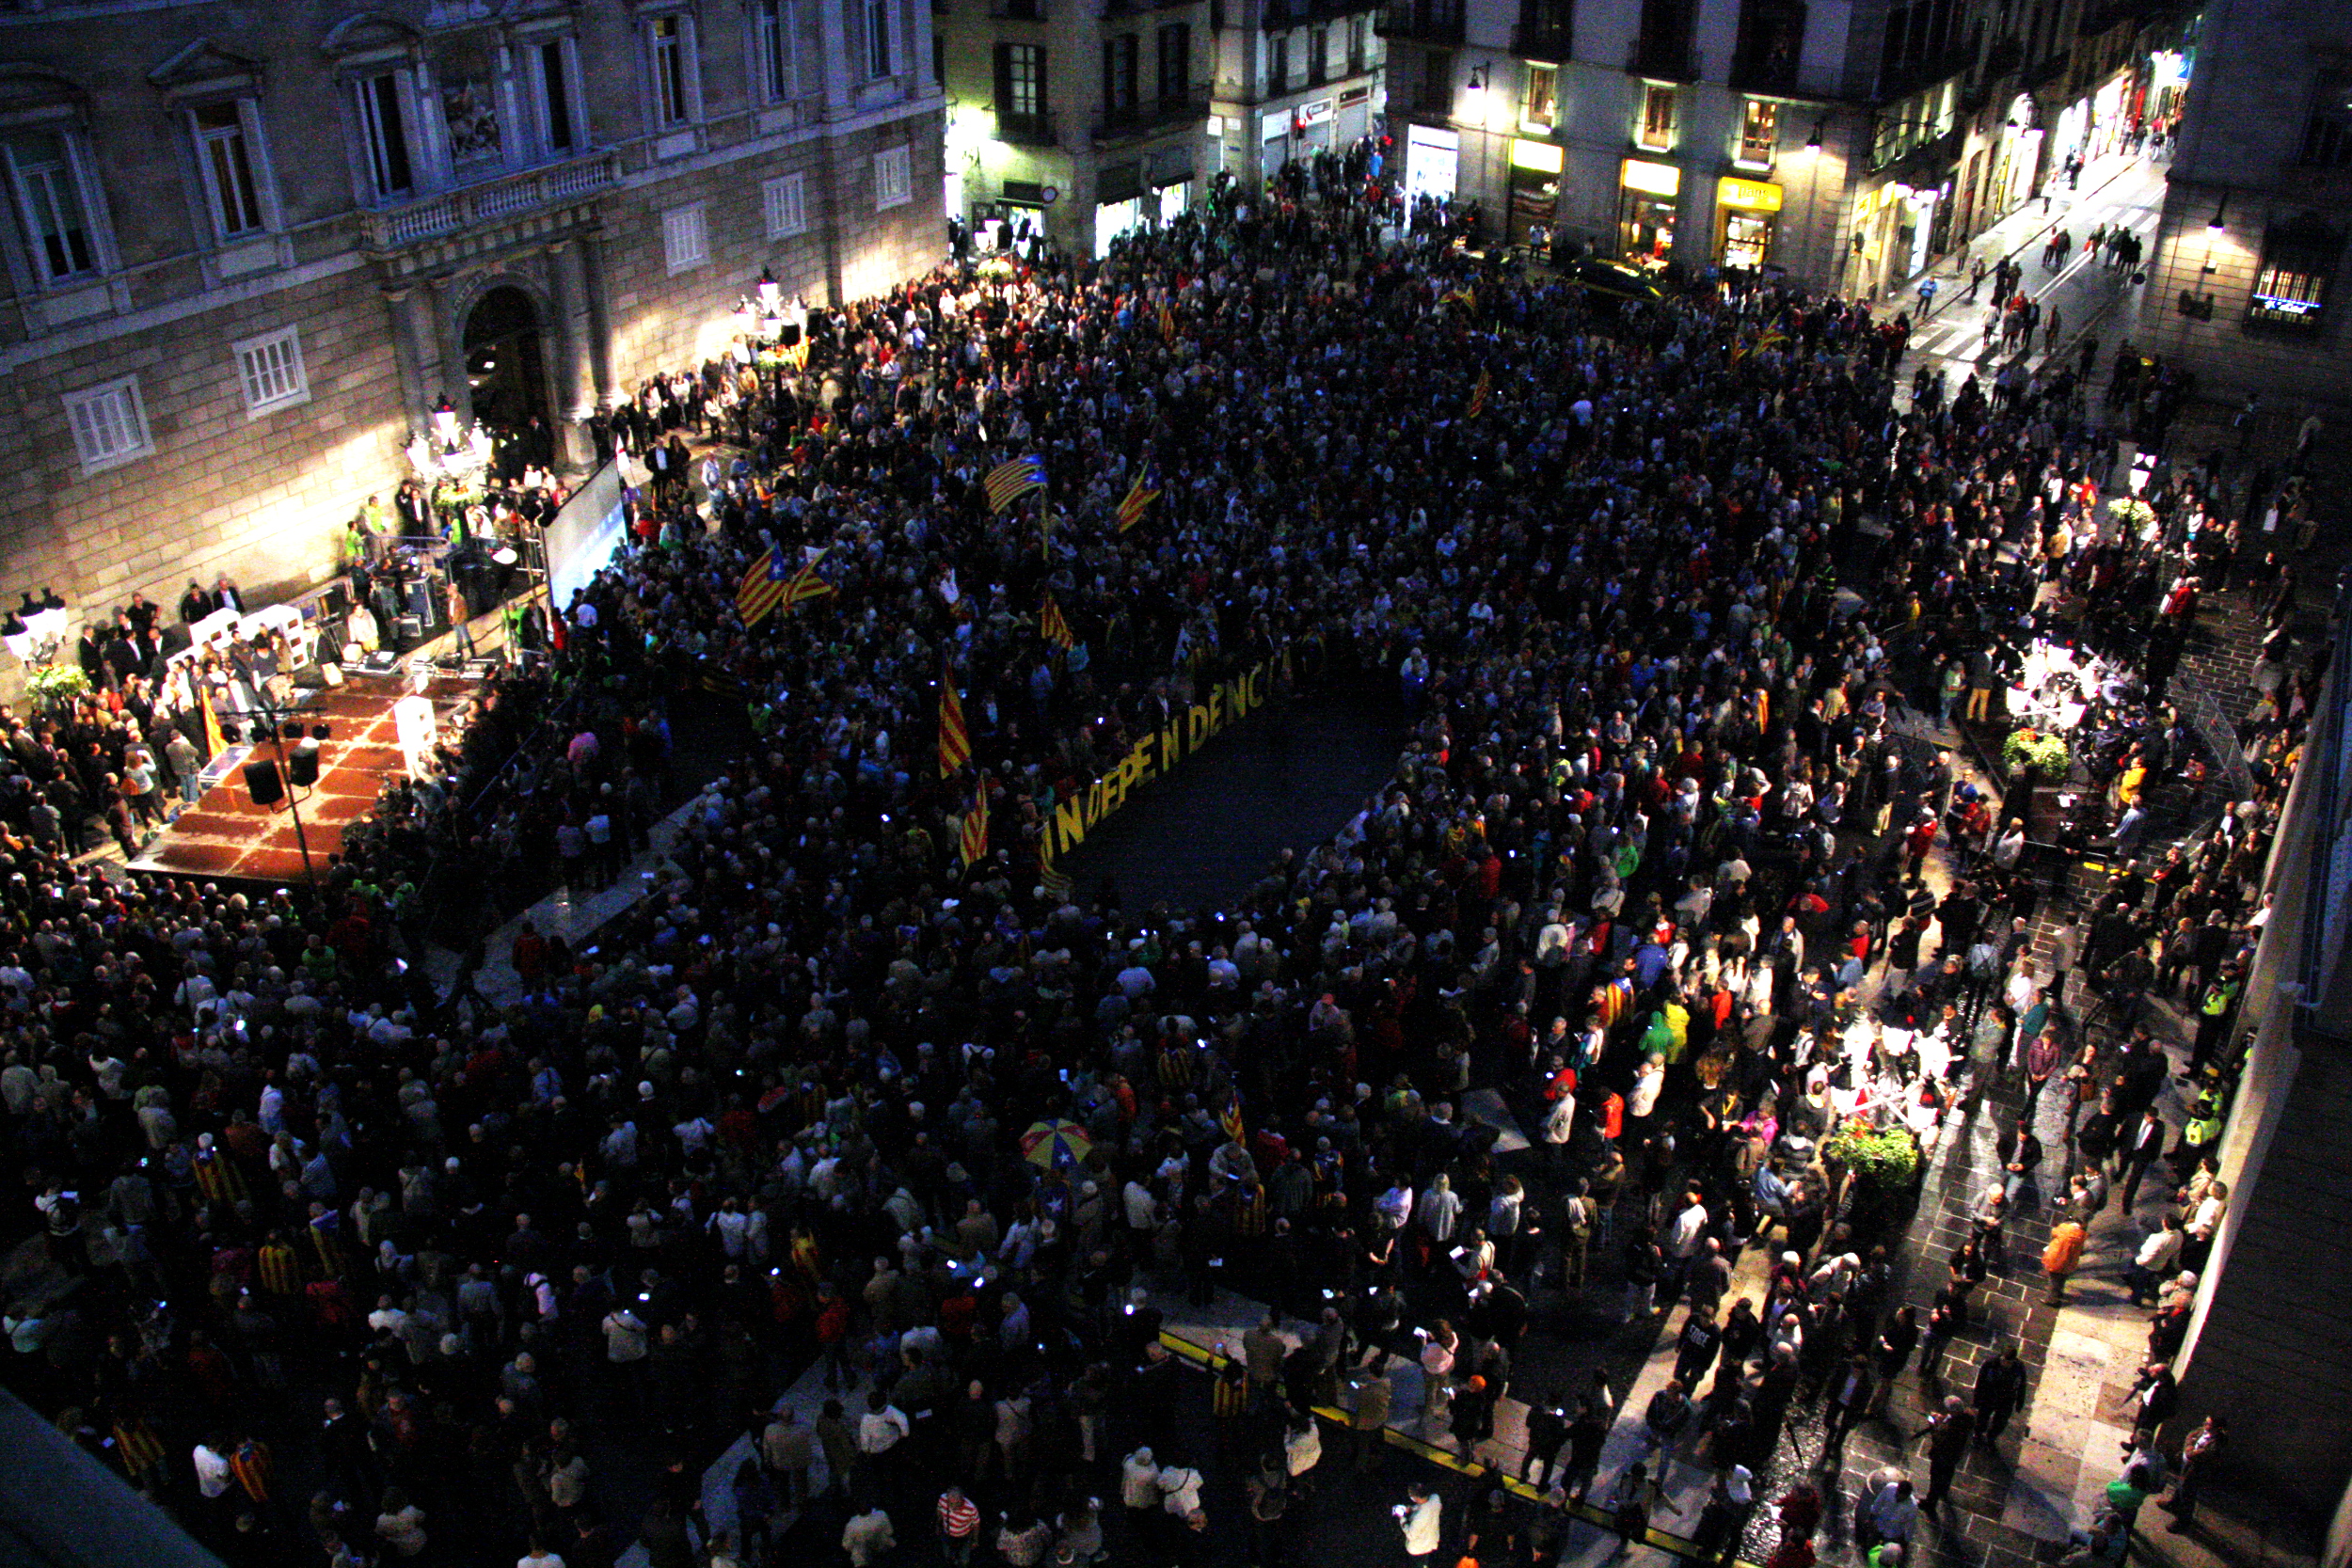 Barcelona's Plaça Sant Jaume hosted this Tuesday's protest against 9N summons